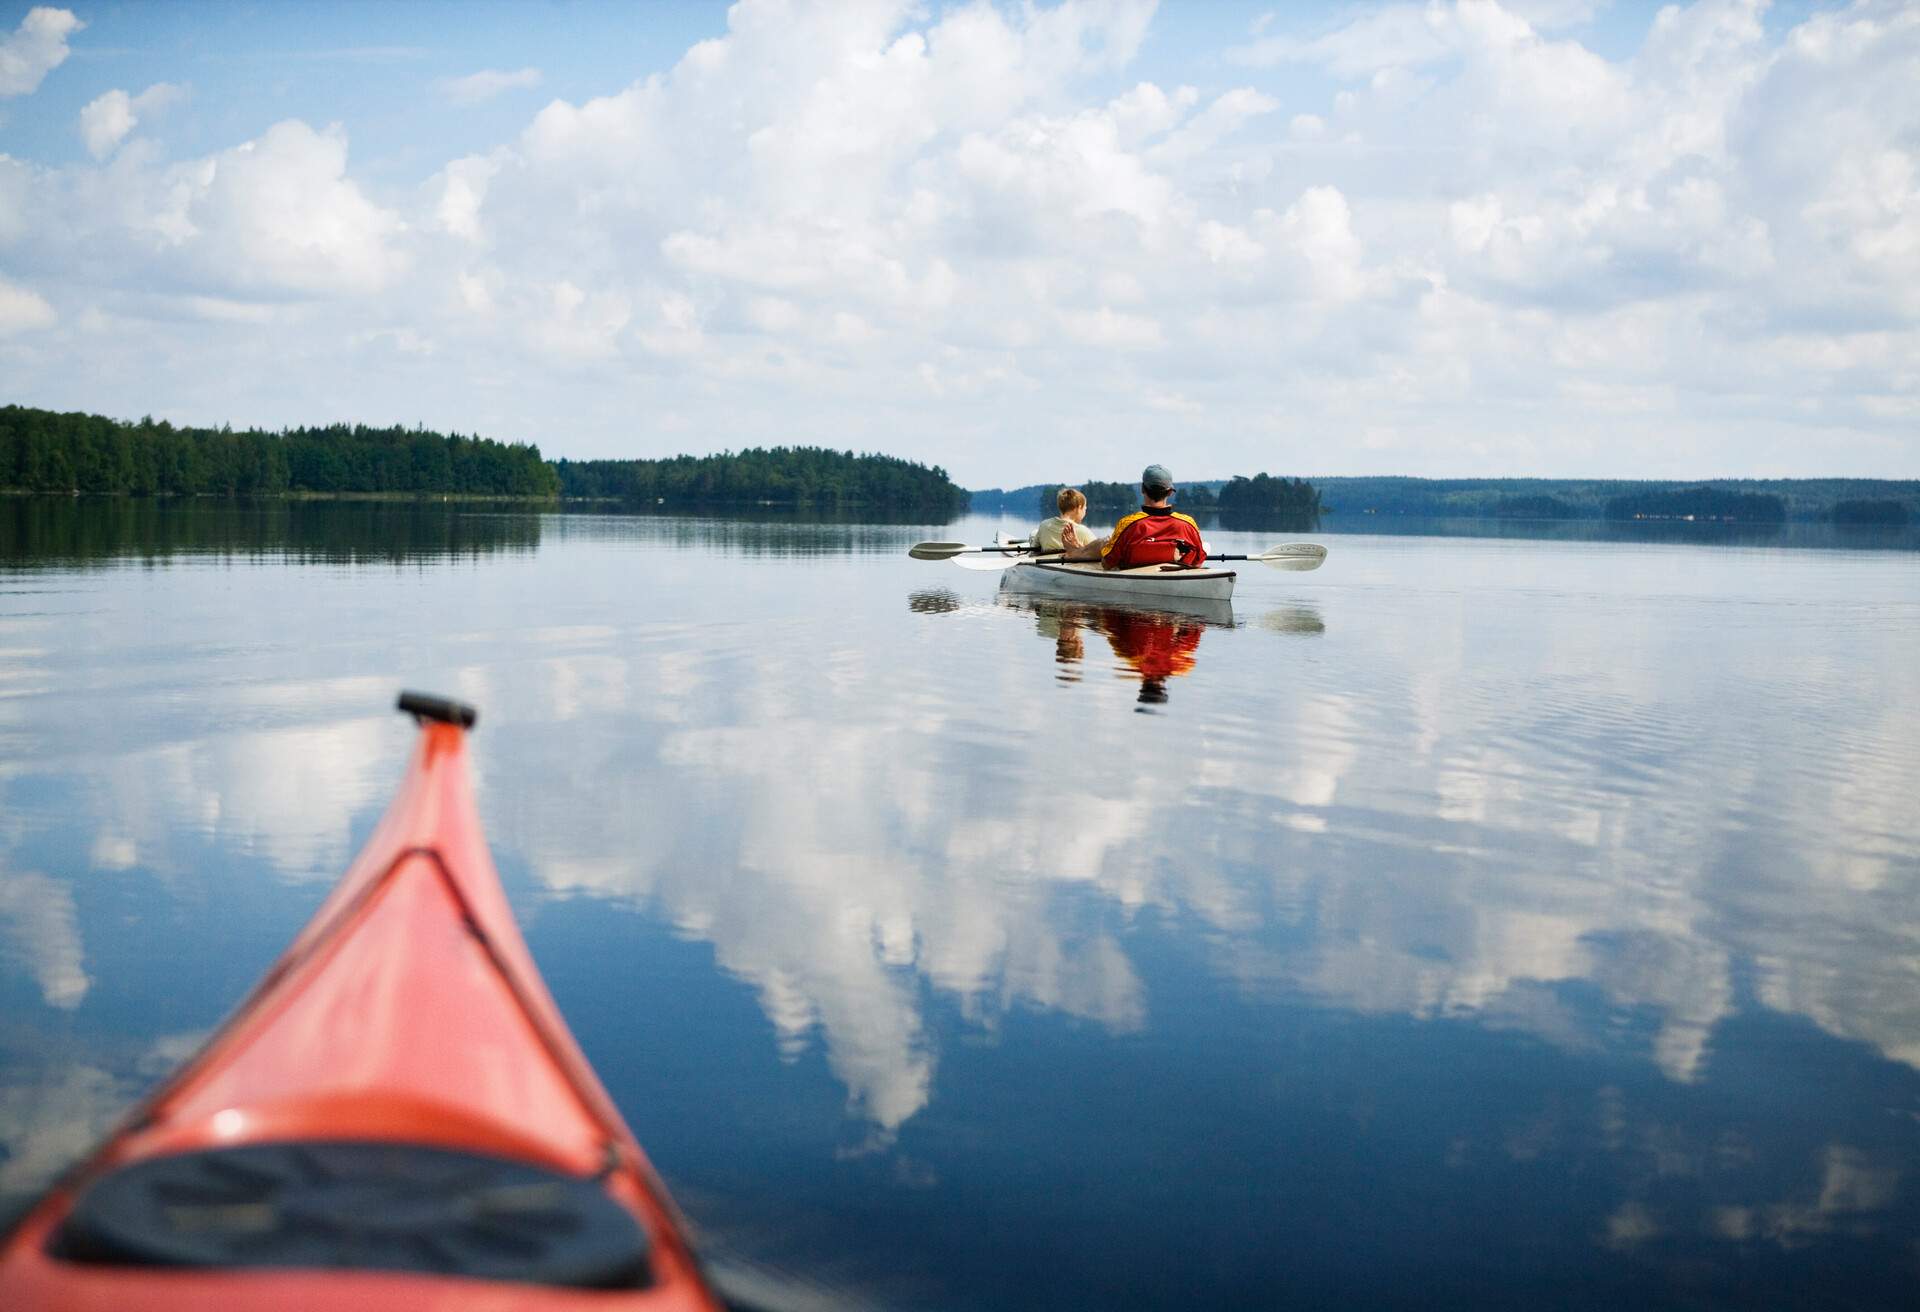 DEST_SWEDEN_THEME_PEOPLE_CANOE-LAKE-GettyImages-77510855